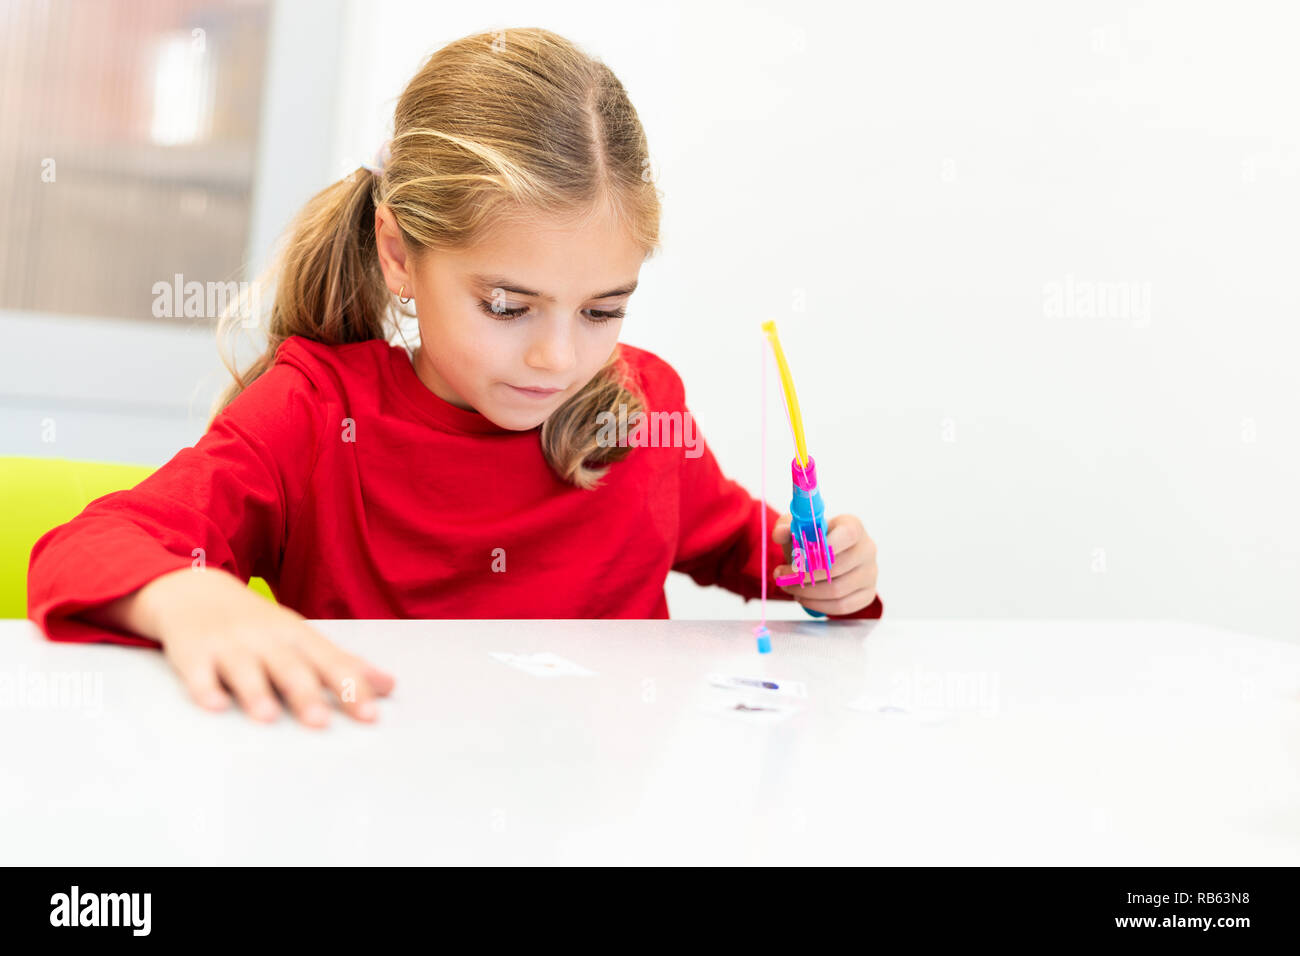 Elementary Age Girl in Child Occupational Therapy Session Doing Playful Exercises. Stock Photo